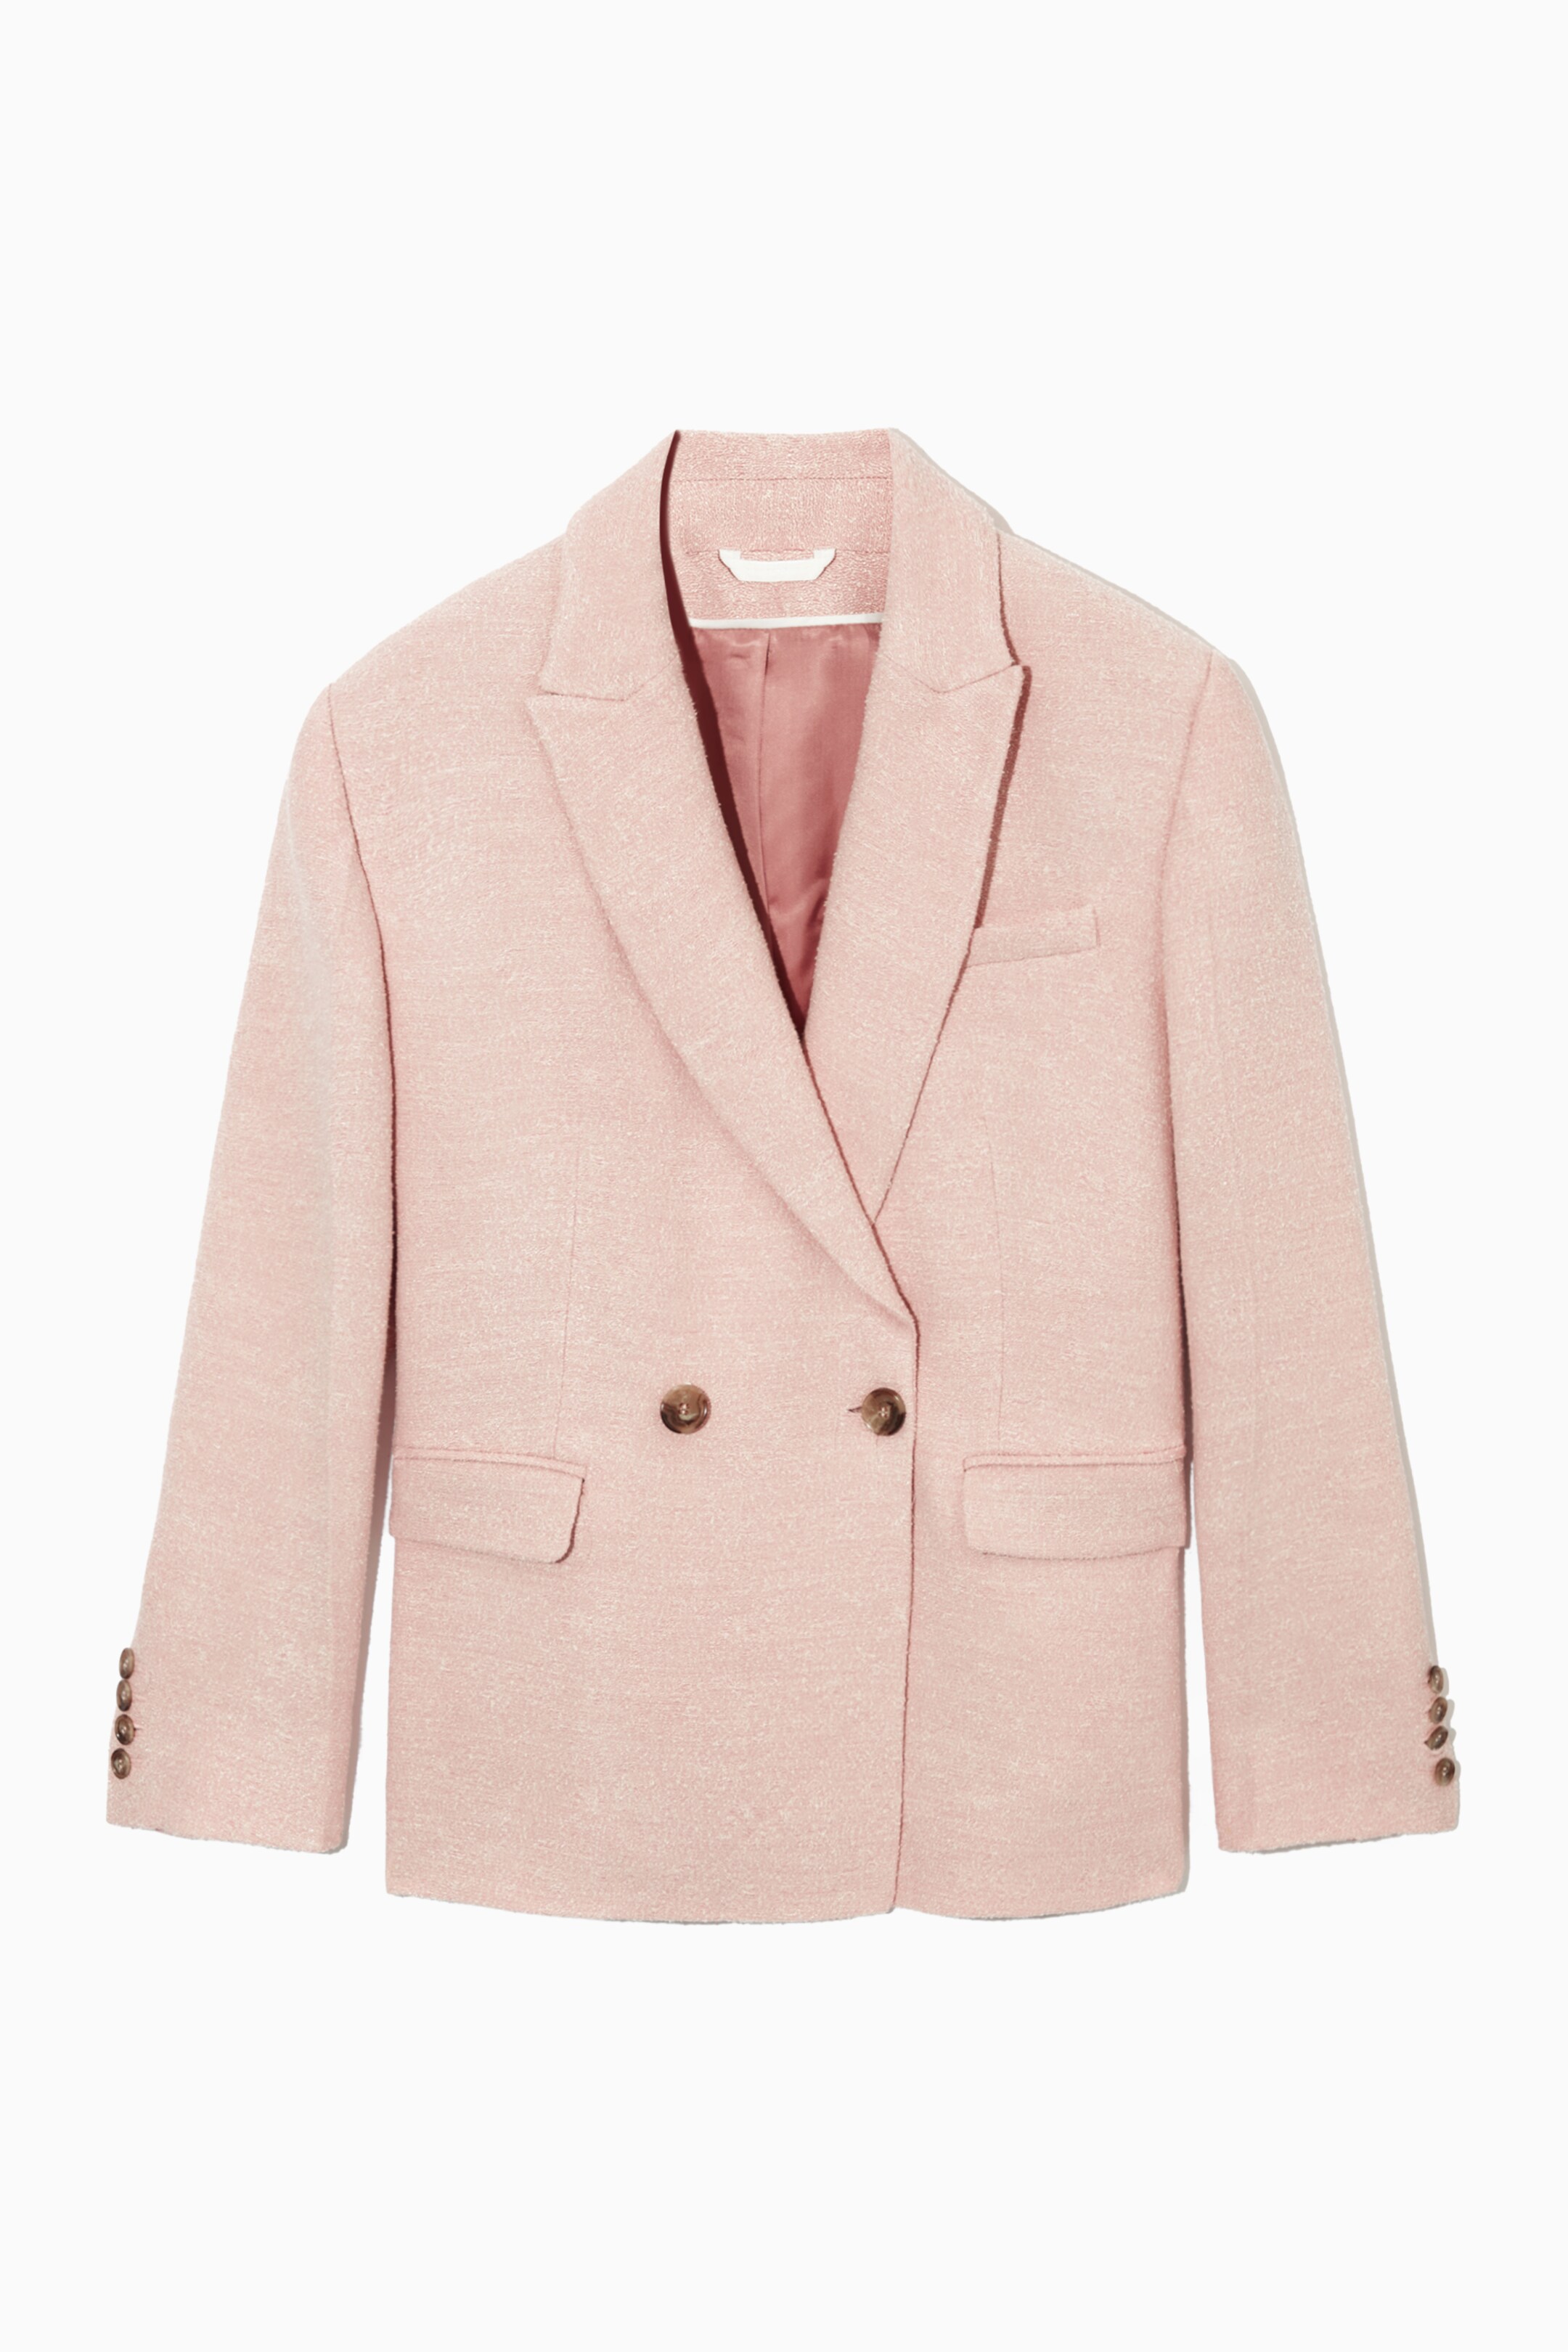 Front image of cos DOUBLE-BREASTED BOUCLÉ BLAZER in LIGHT PINK MÉLANGE